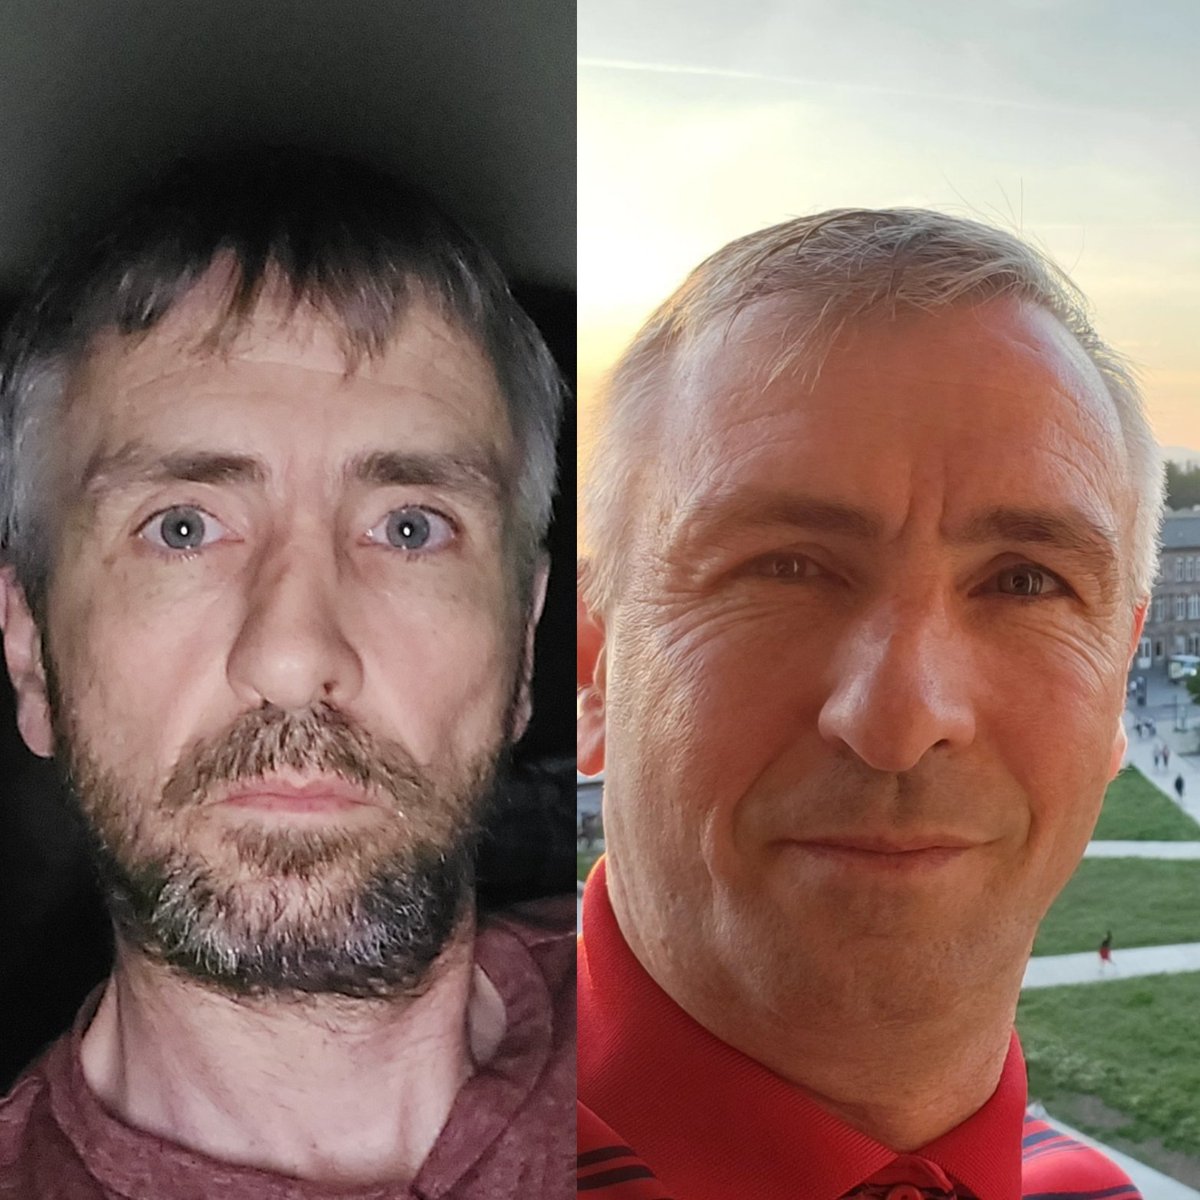 Just reached 20K Followers, humbled having so many follow my story. Let me introduce myself, My name is Peter, on the left broken by stigma, homeless & drug dependent, on the left the result of support & love. If you see this, be kind, say hi 👋 #SupportDontPunish always 💜